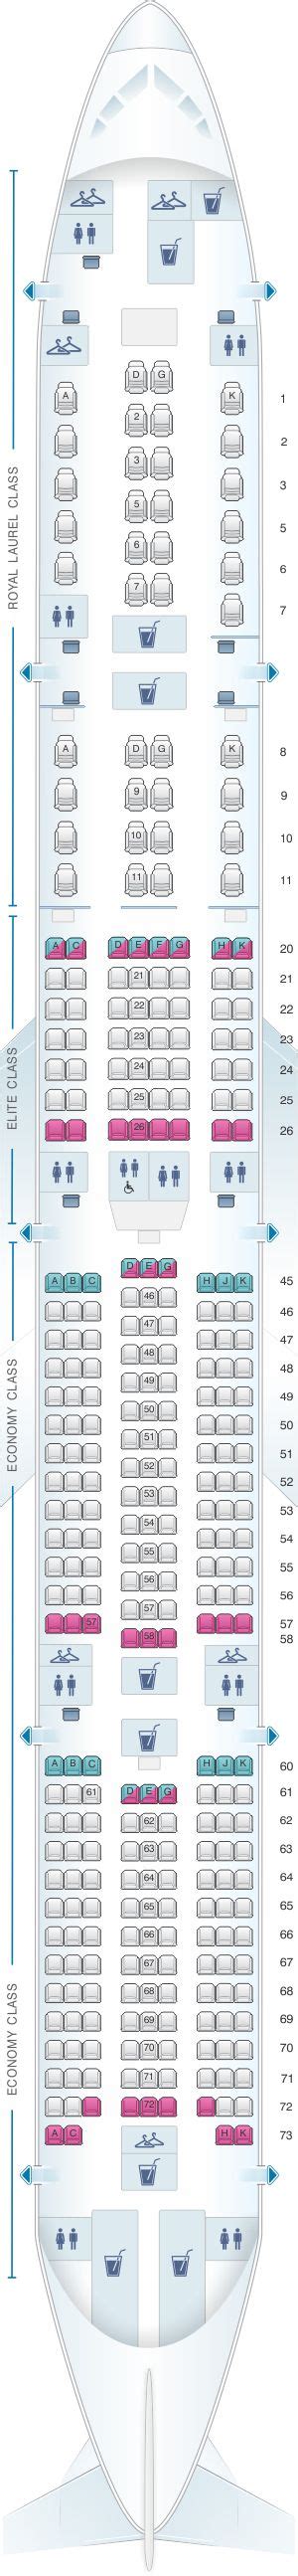 The Seating Plan For An Airliners Flight Deck Including Seats And Numbers